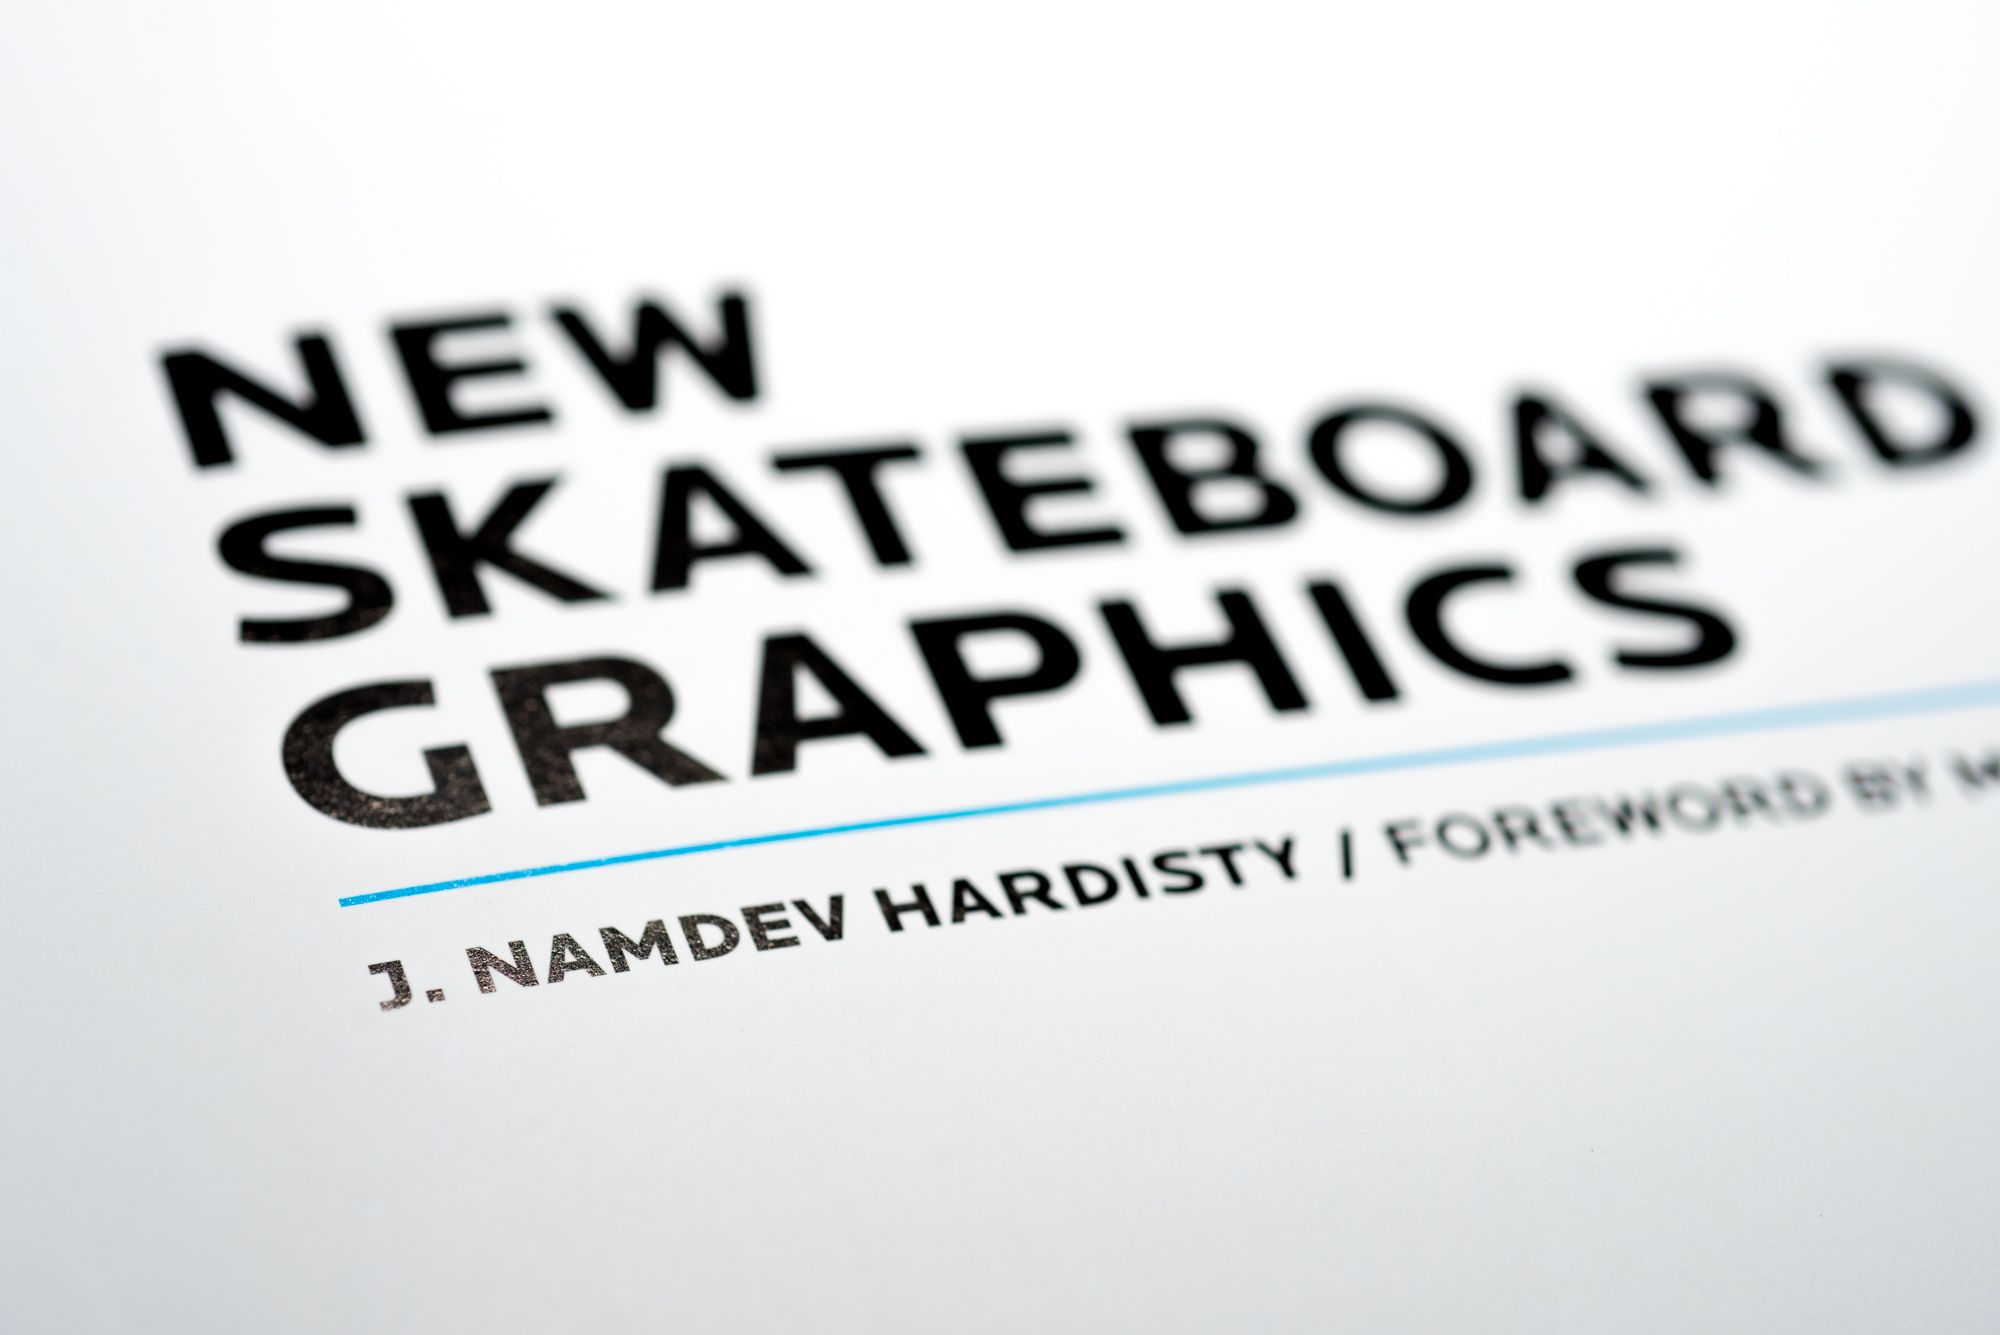 New Skateboards Graphics book